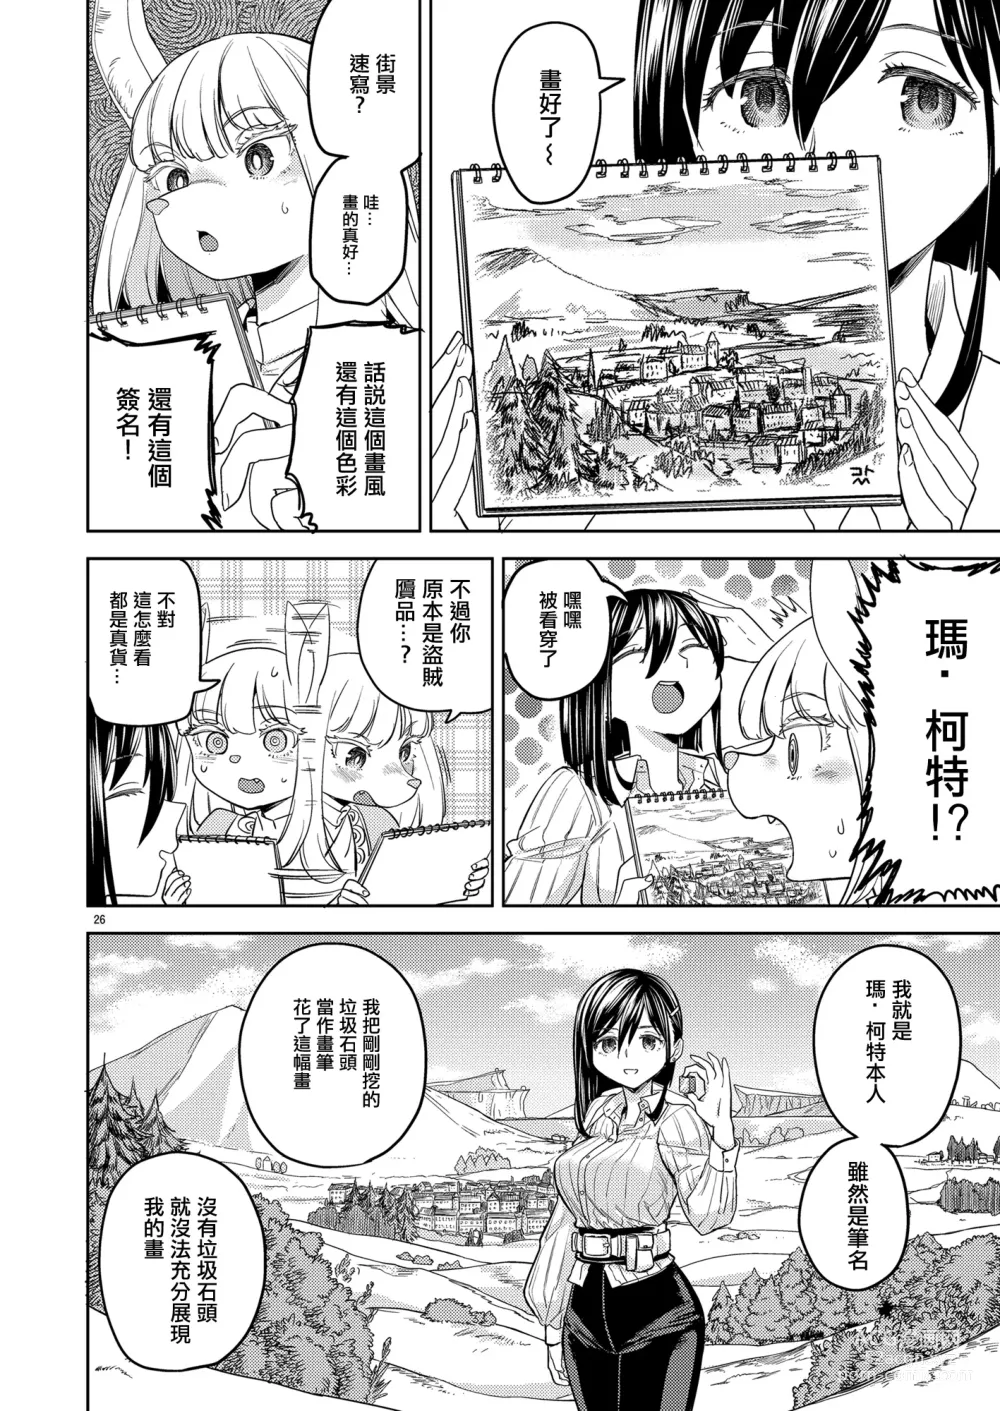 Page 30 of doujinshi 來一場蜜月旅行